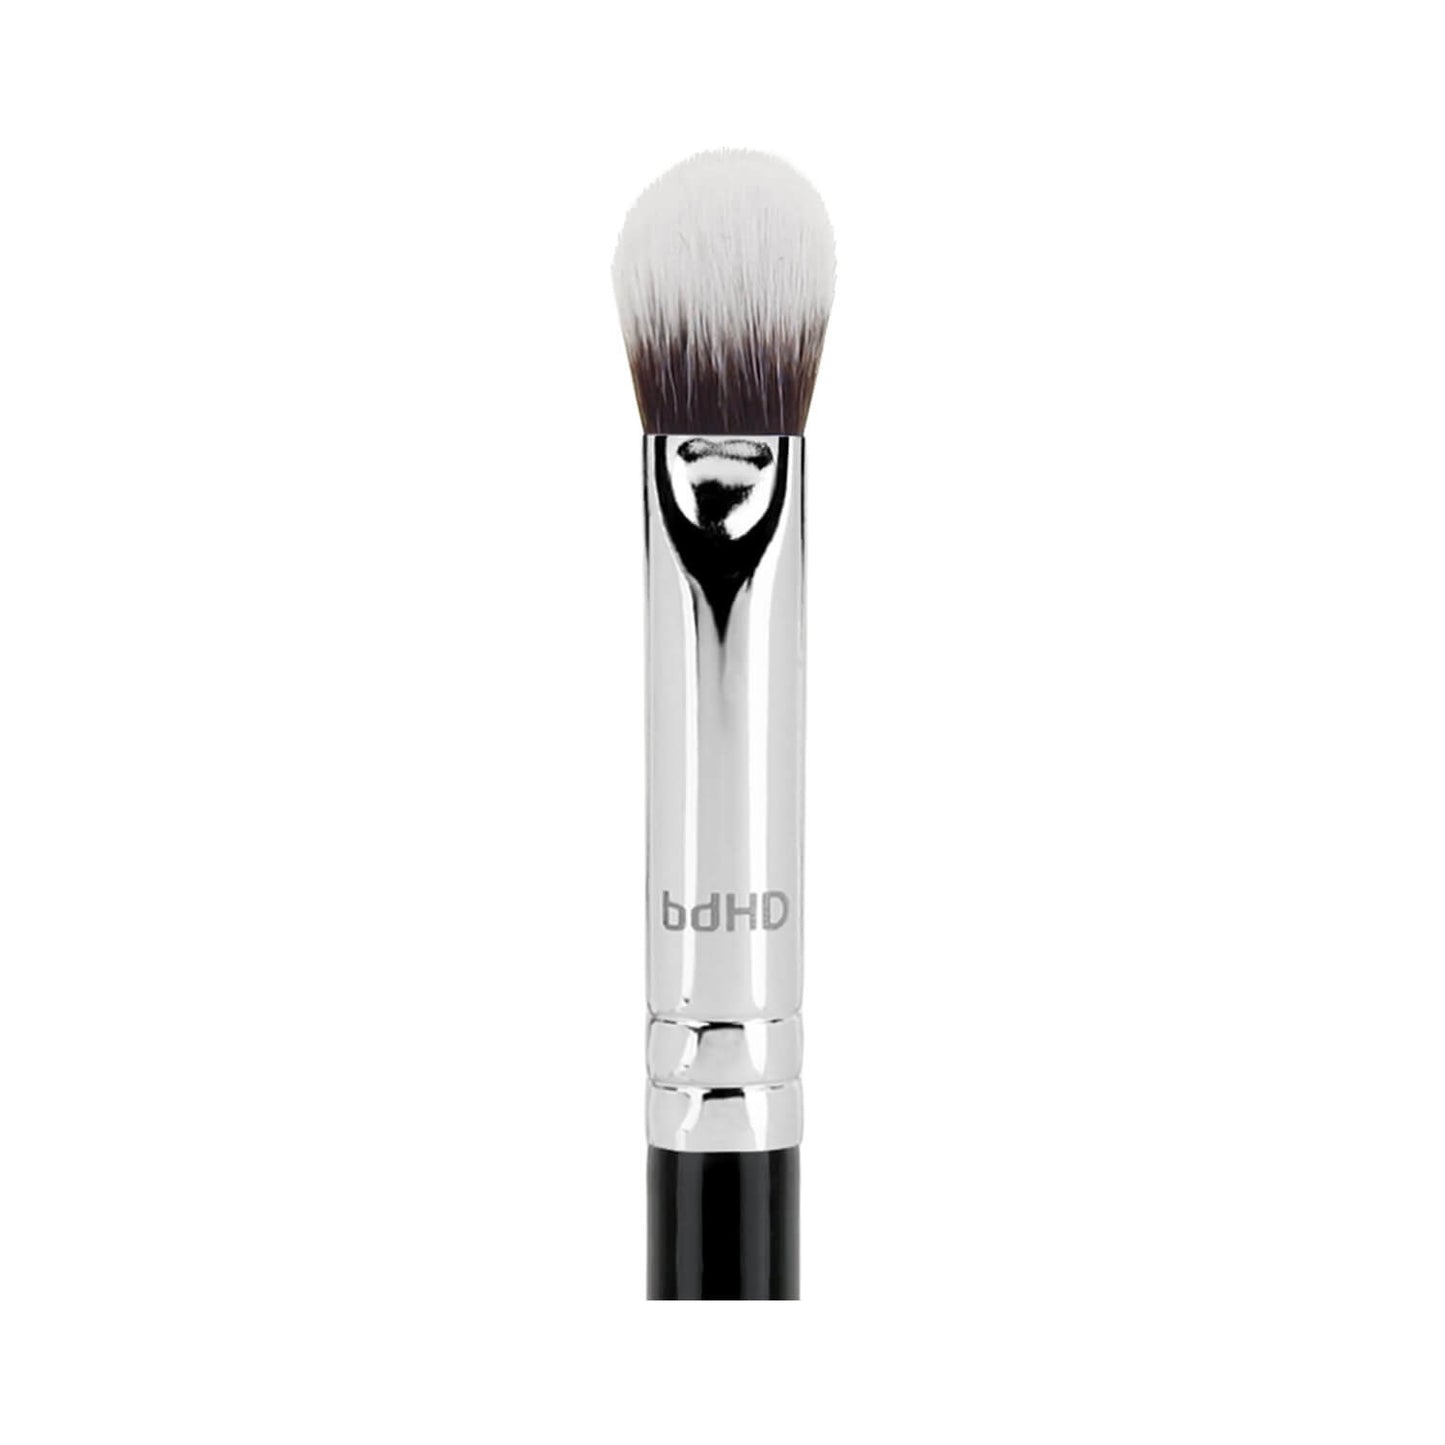 BDellium Tools - Maestro Line - 788 BDHD Phase III Blending/Concealing Brush - Synthetic